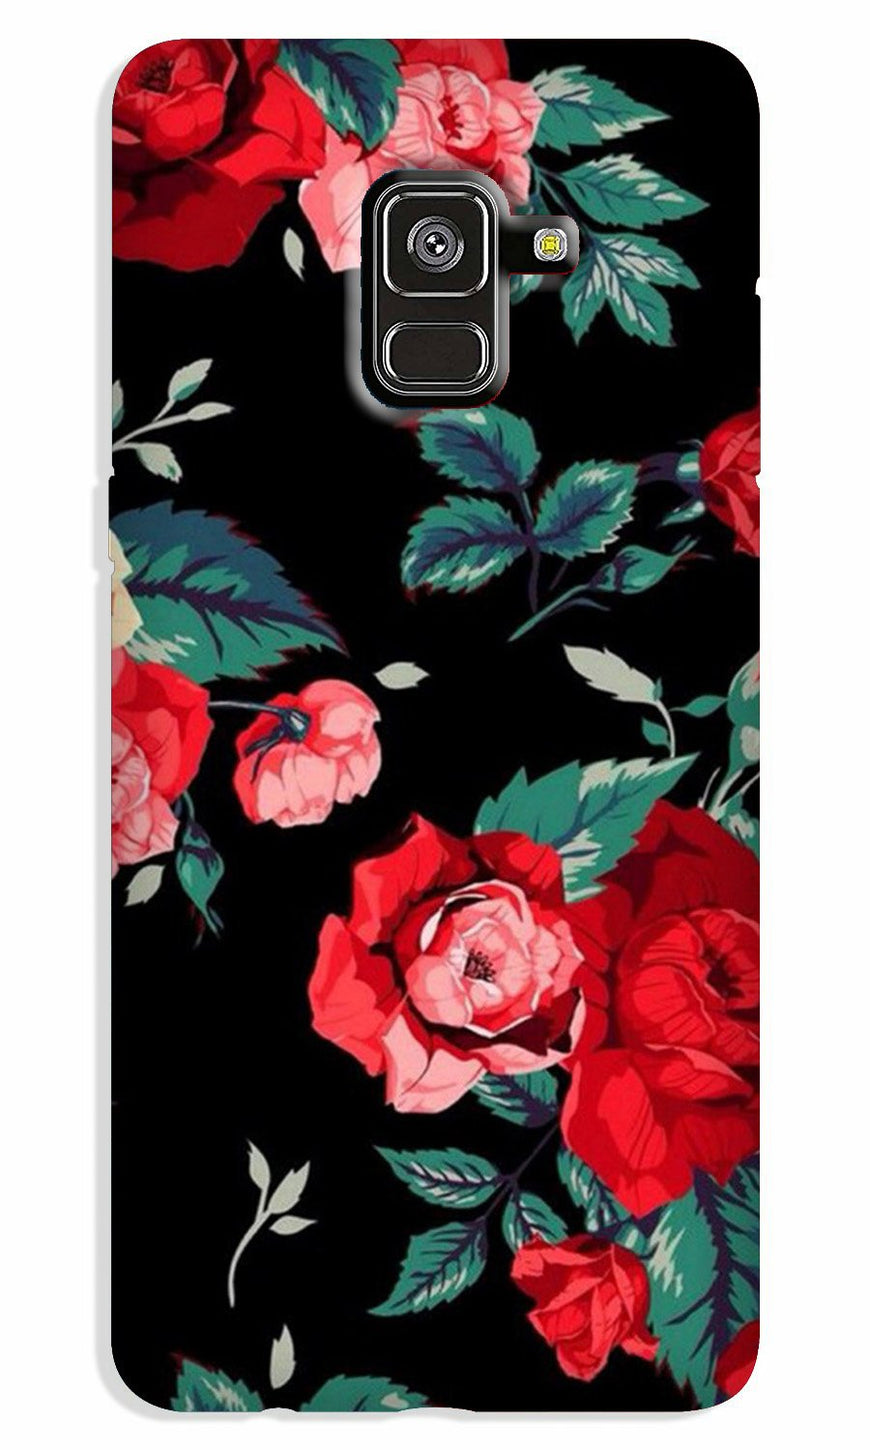 Red Rose2 Case for Galaxy J6 / On6